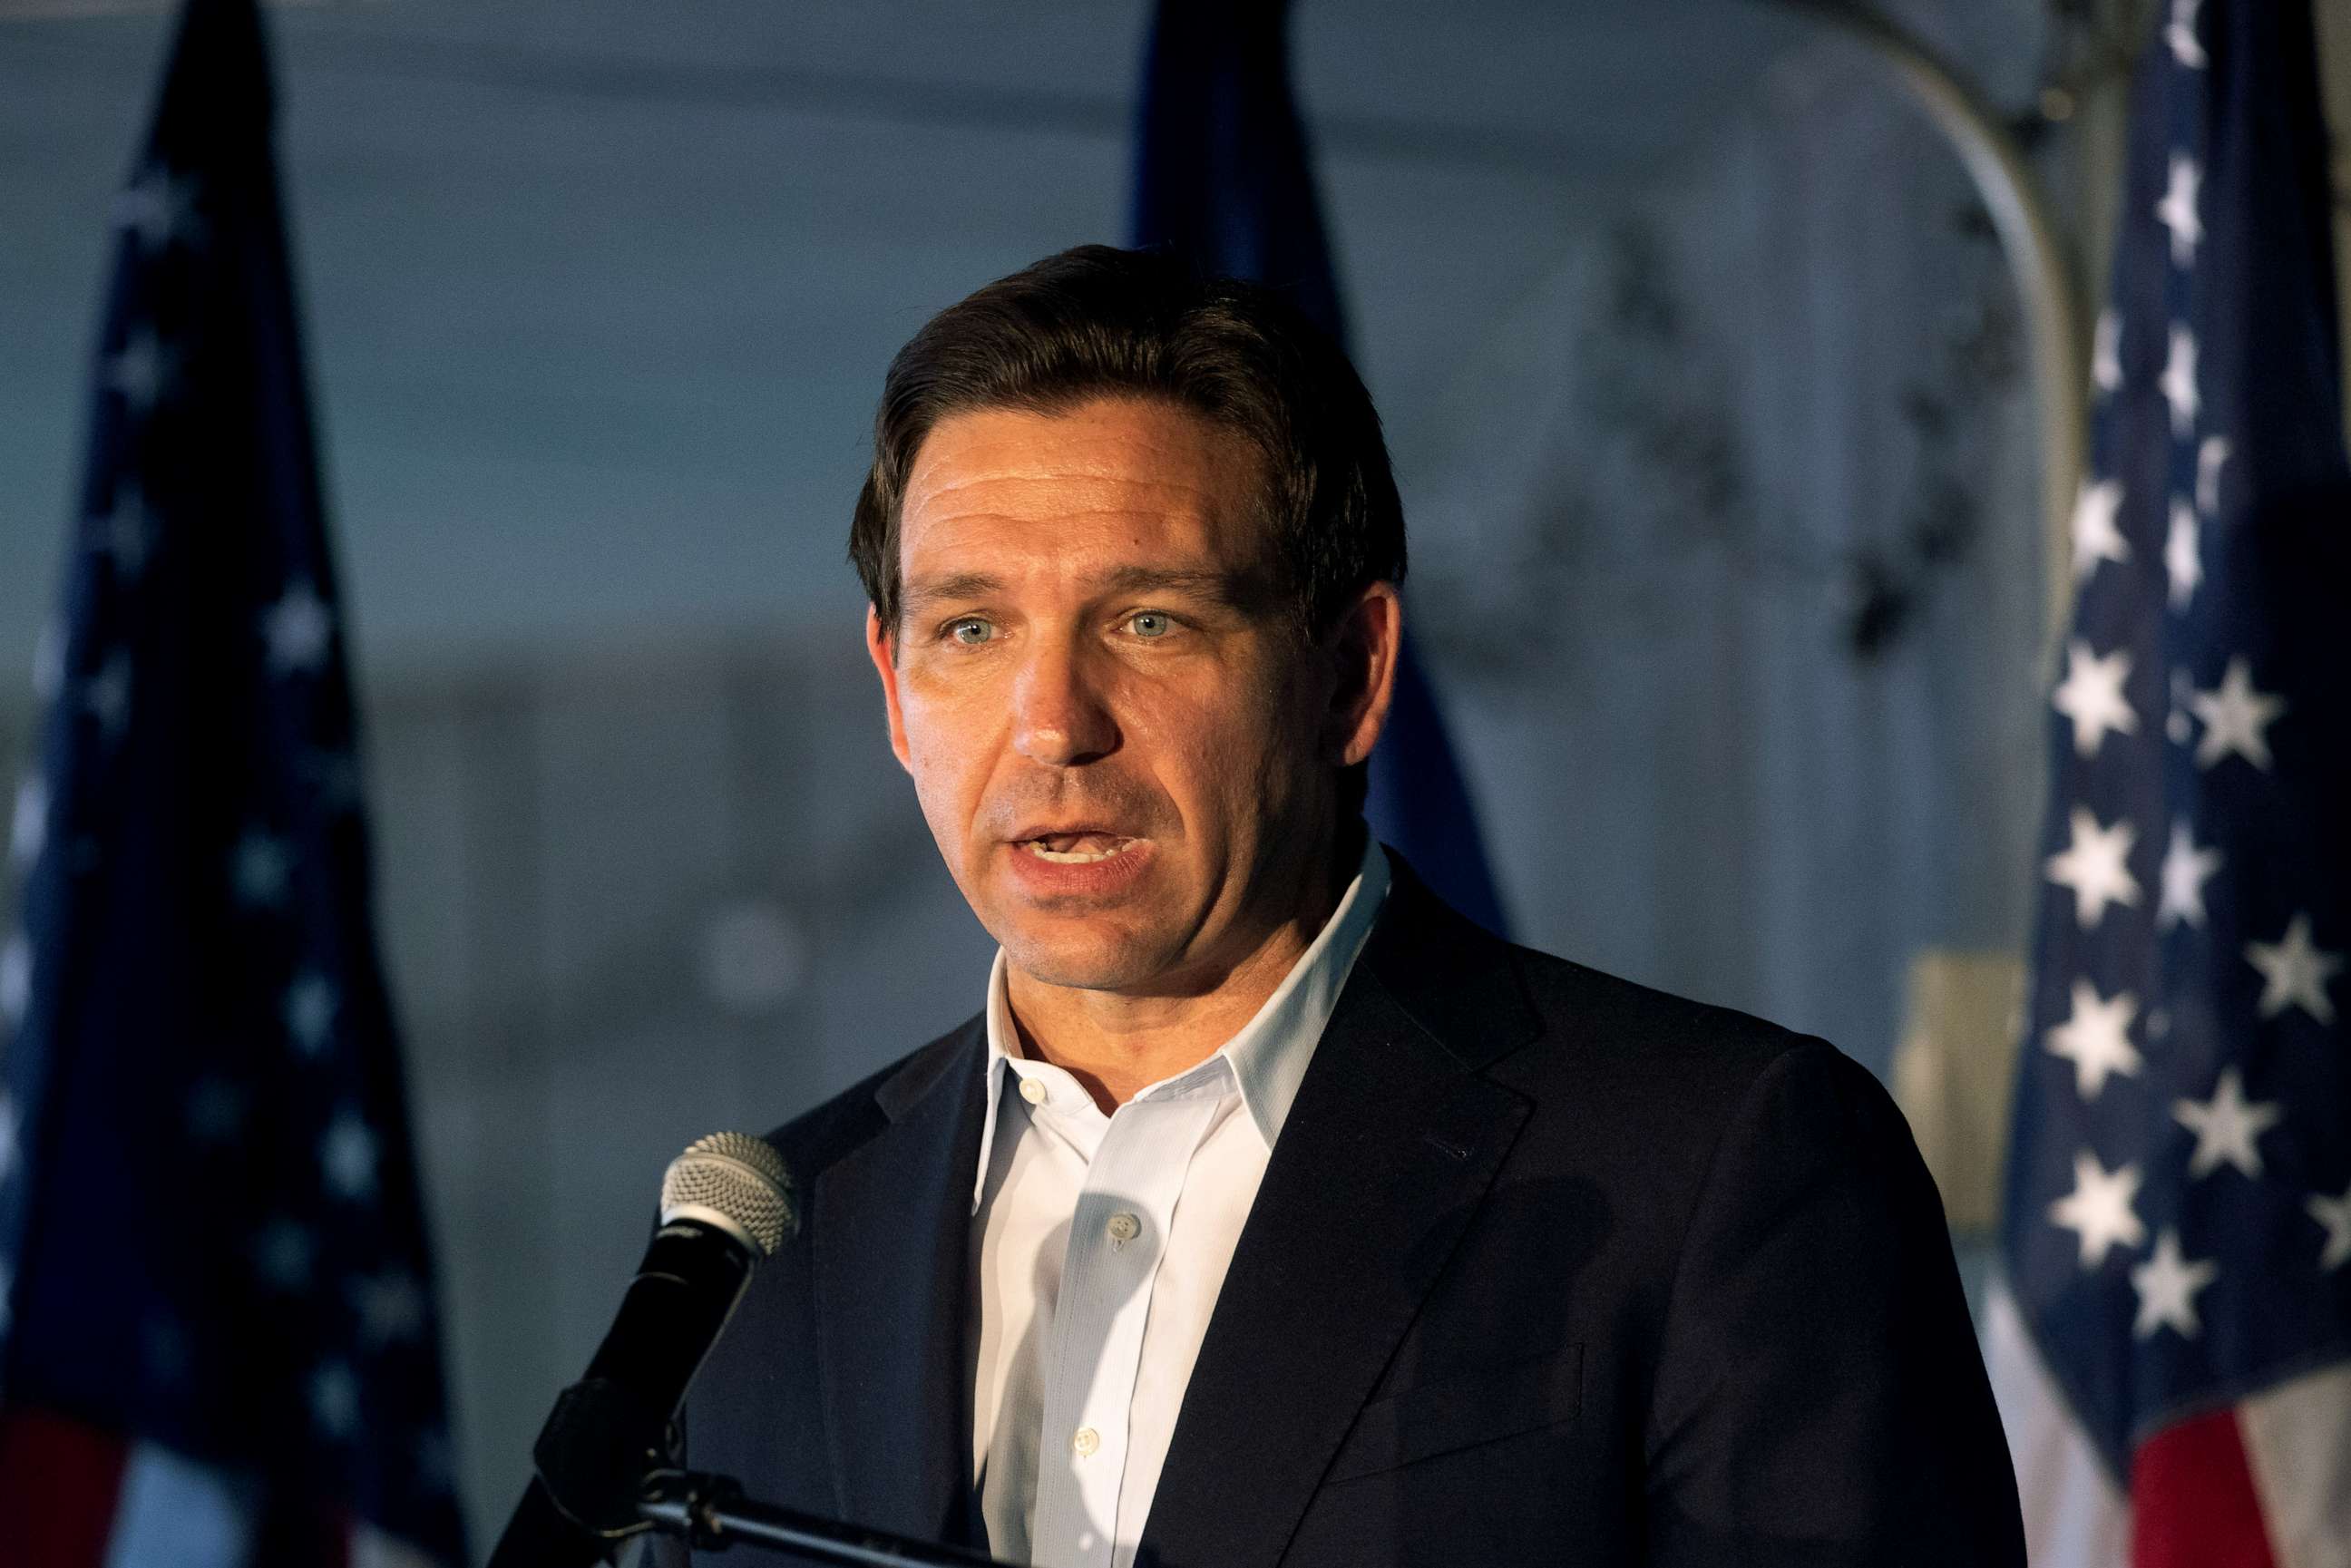 PHOTO: Republican presidential candidate Florida Gov. Ron DeSantis delivers remarks during his "Our Great American Comeback" Tour stop on June 1, 2023 in Salem, New Hampshire. (Photo by Scott Eisen/Getty Images)